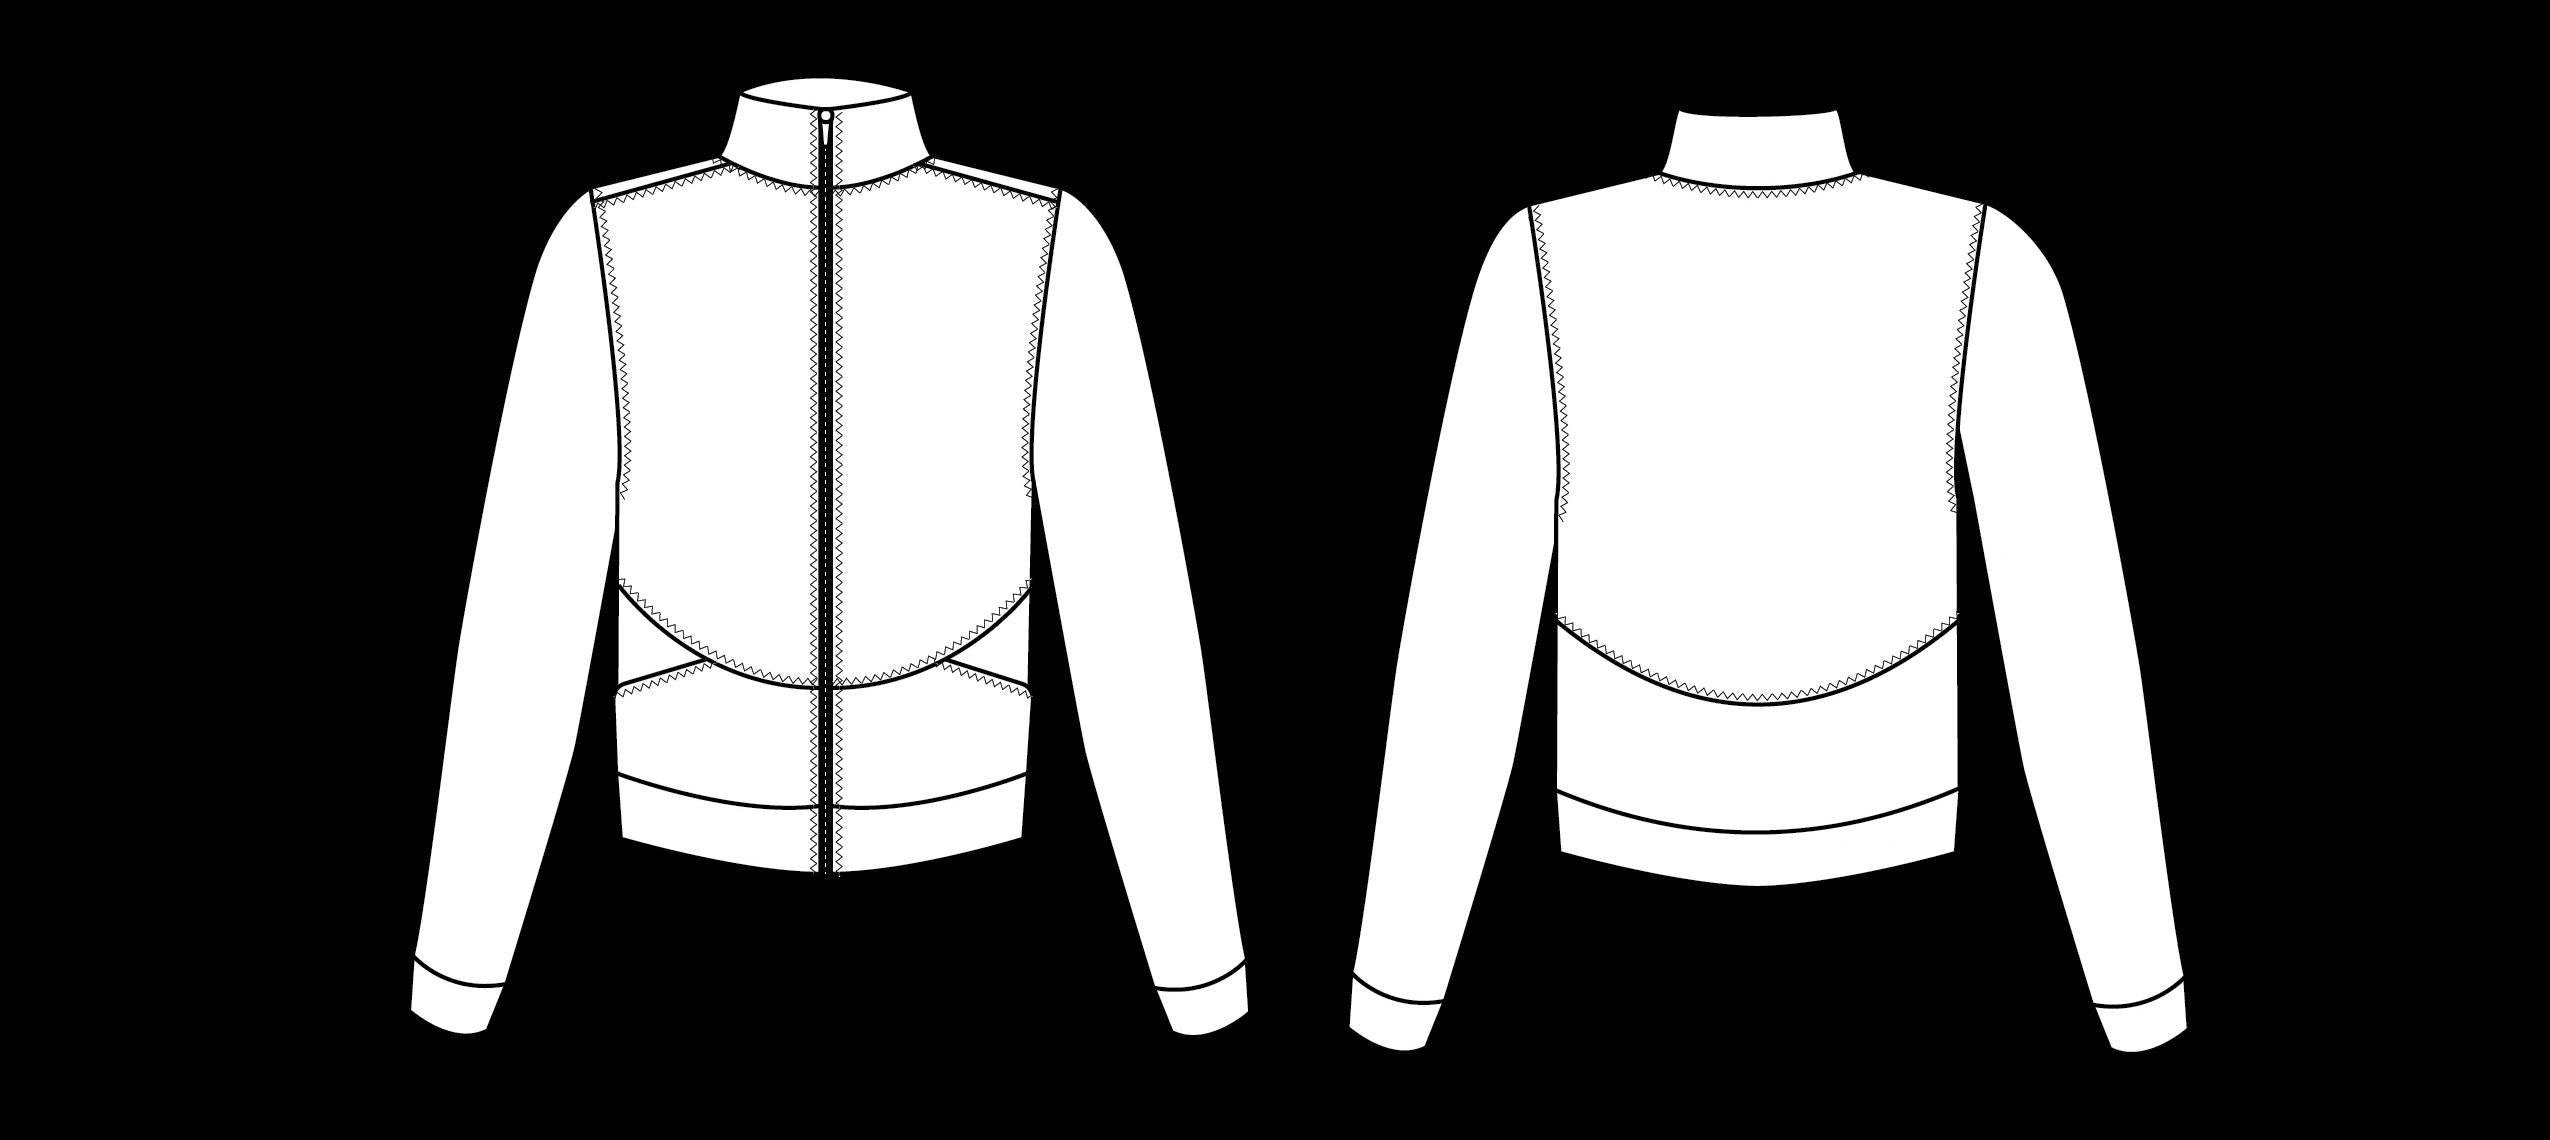 FRIDAY Pattern Co the Arlo Track Jacket Sewing Pattern